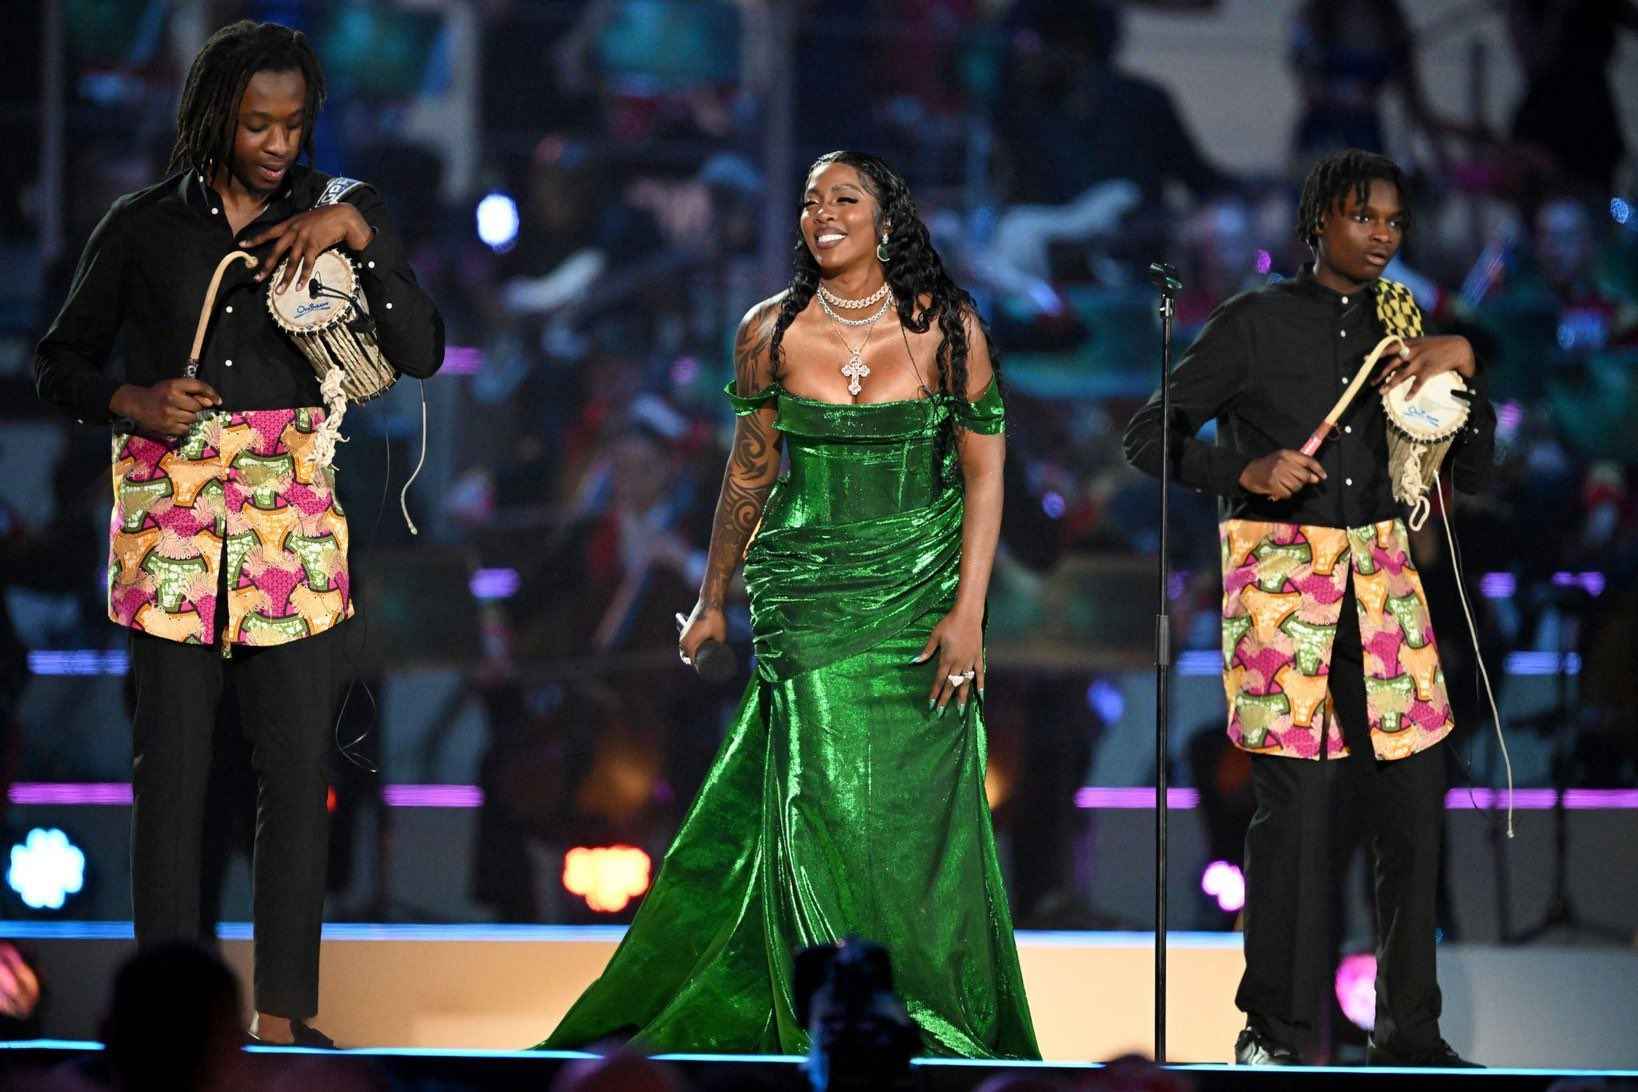 Tiwa Savage reveals nervousness almost ruined her performance at King Charles III’s coronation